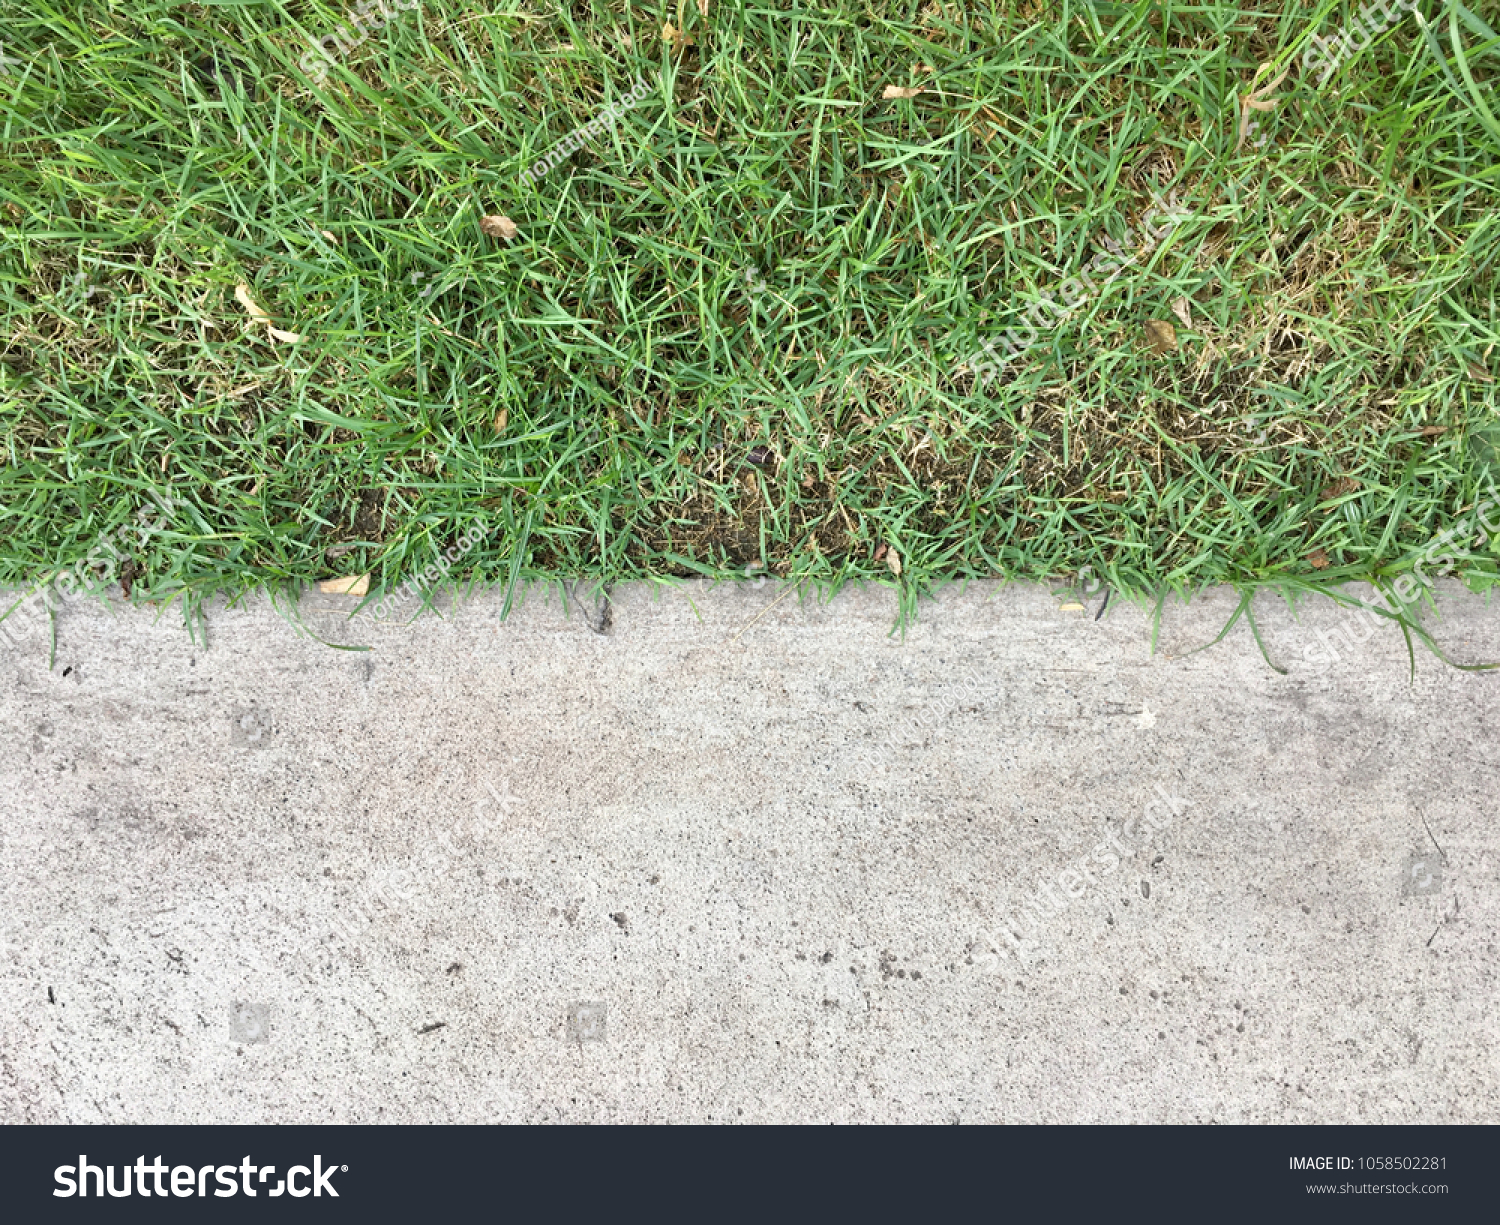 Grass with cement floor texture for background design #1058502281